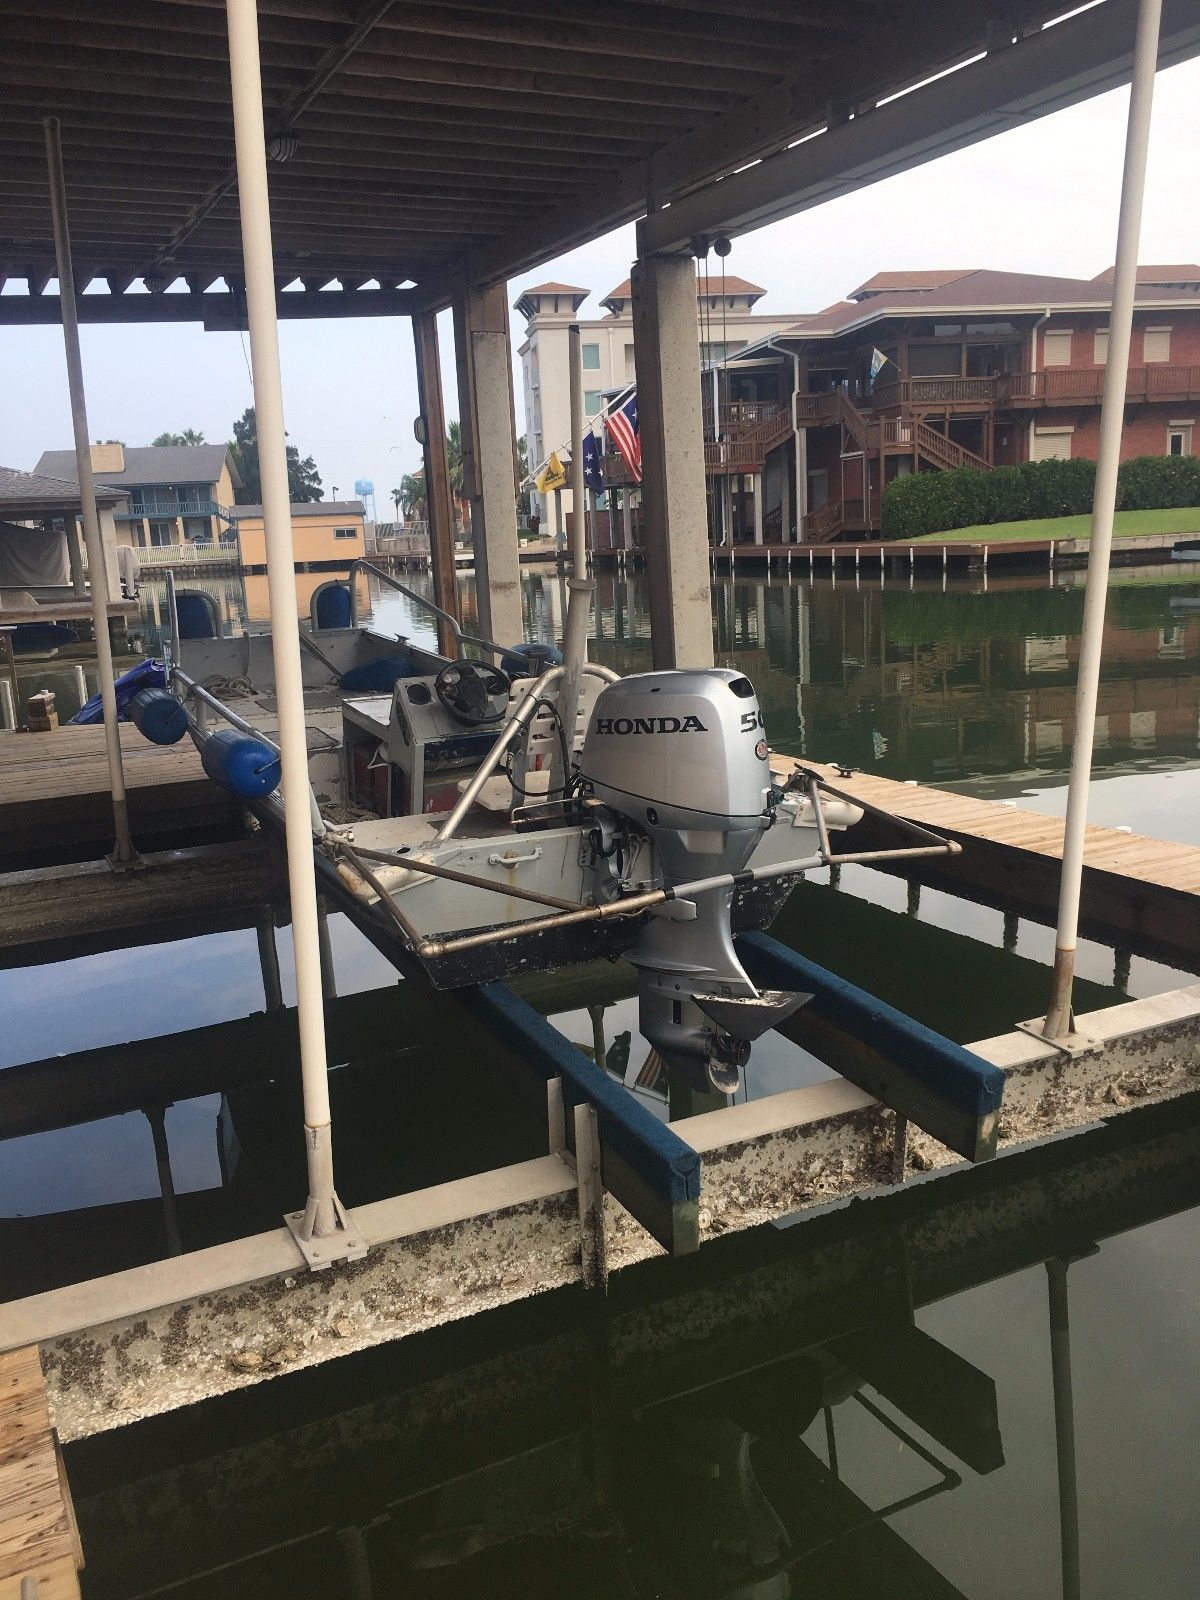 waco 16' jon boat 2004 for sale for $6,500 - boats-from